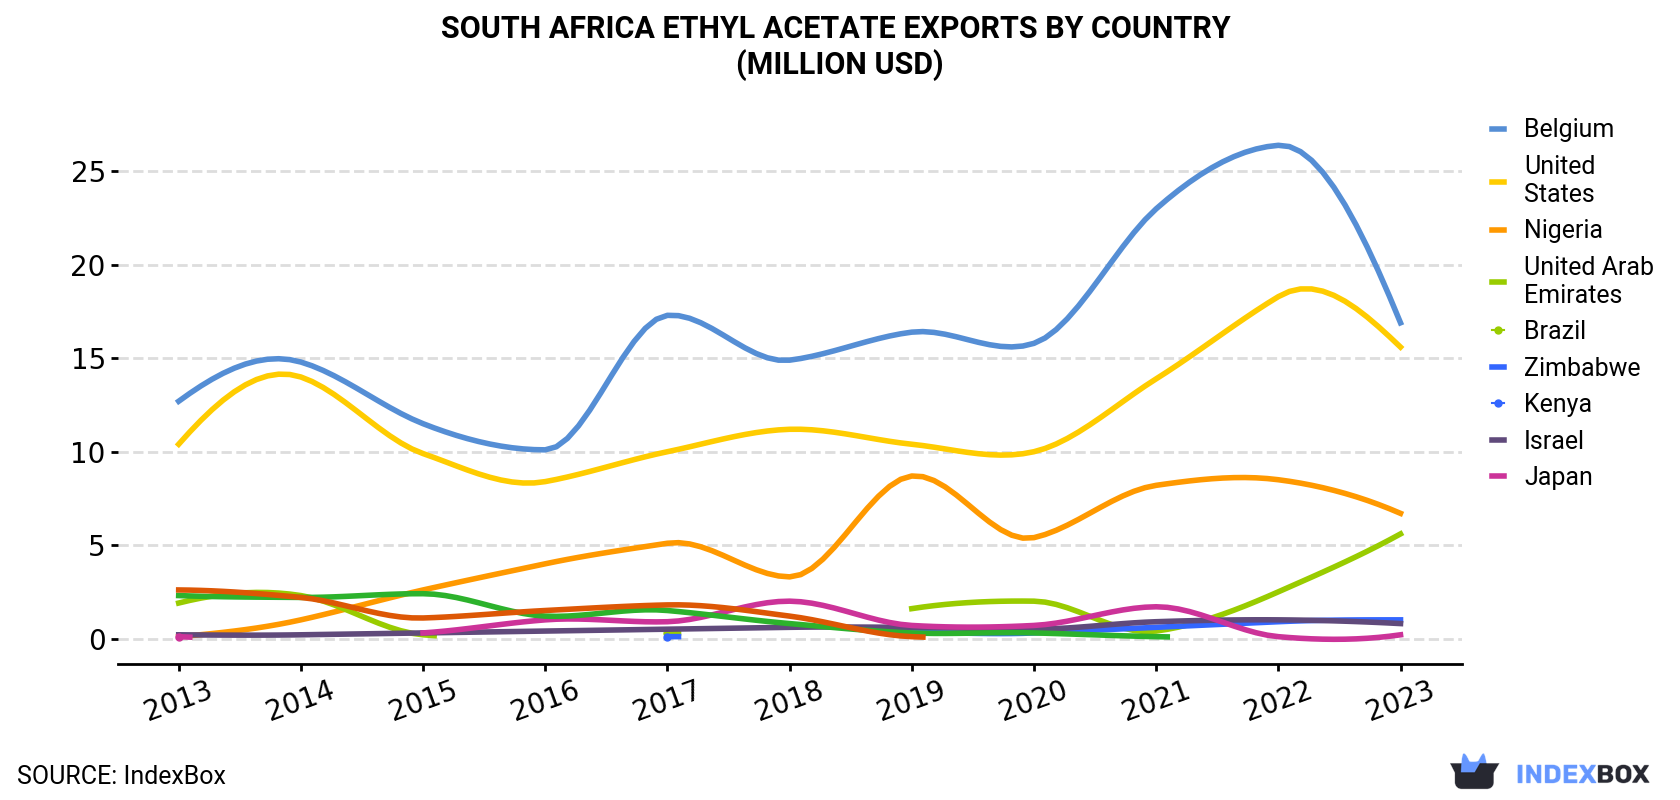 South Africa Ethyl Acetate Exports By Country (Million USD)